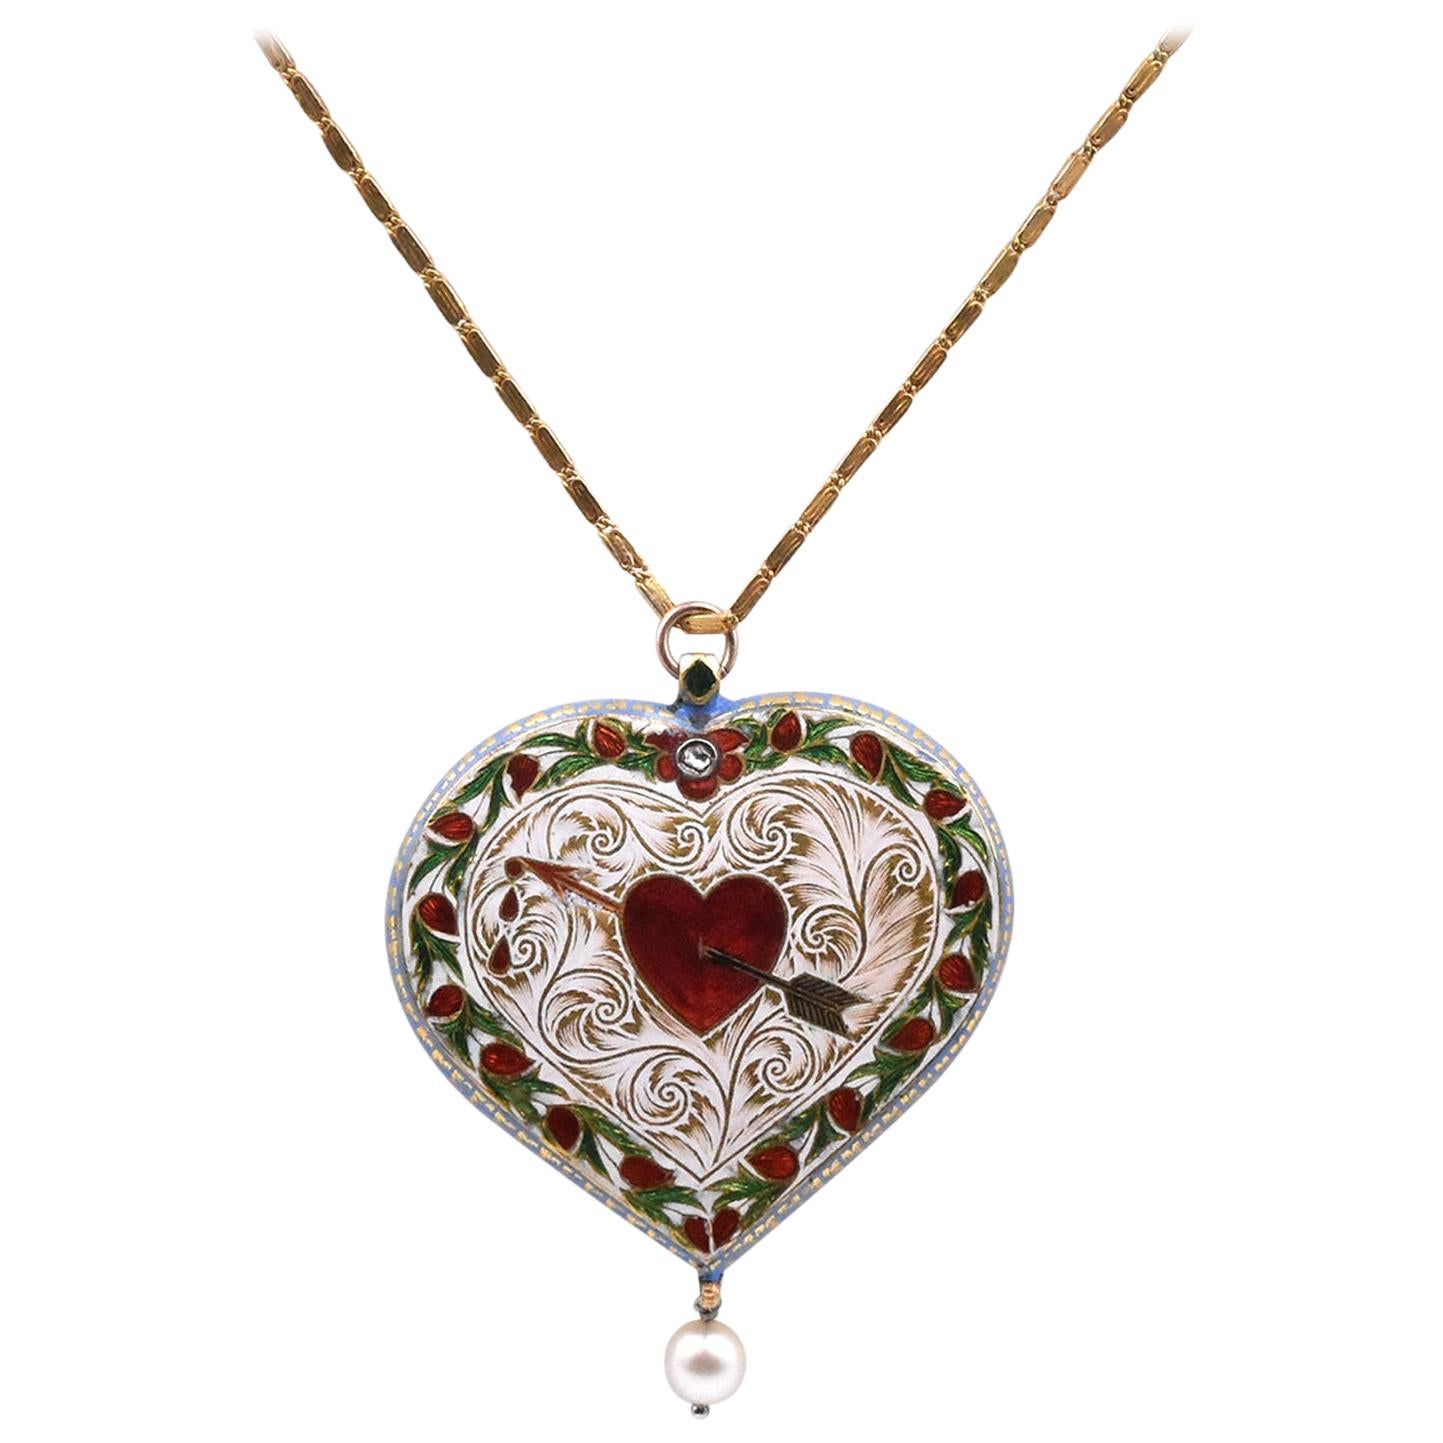 18 Karat Yellow Gold Vintage Enamel Heart Necklace with Pearl Drop